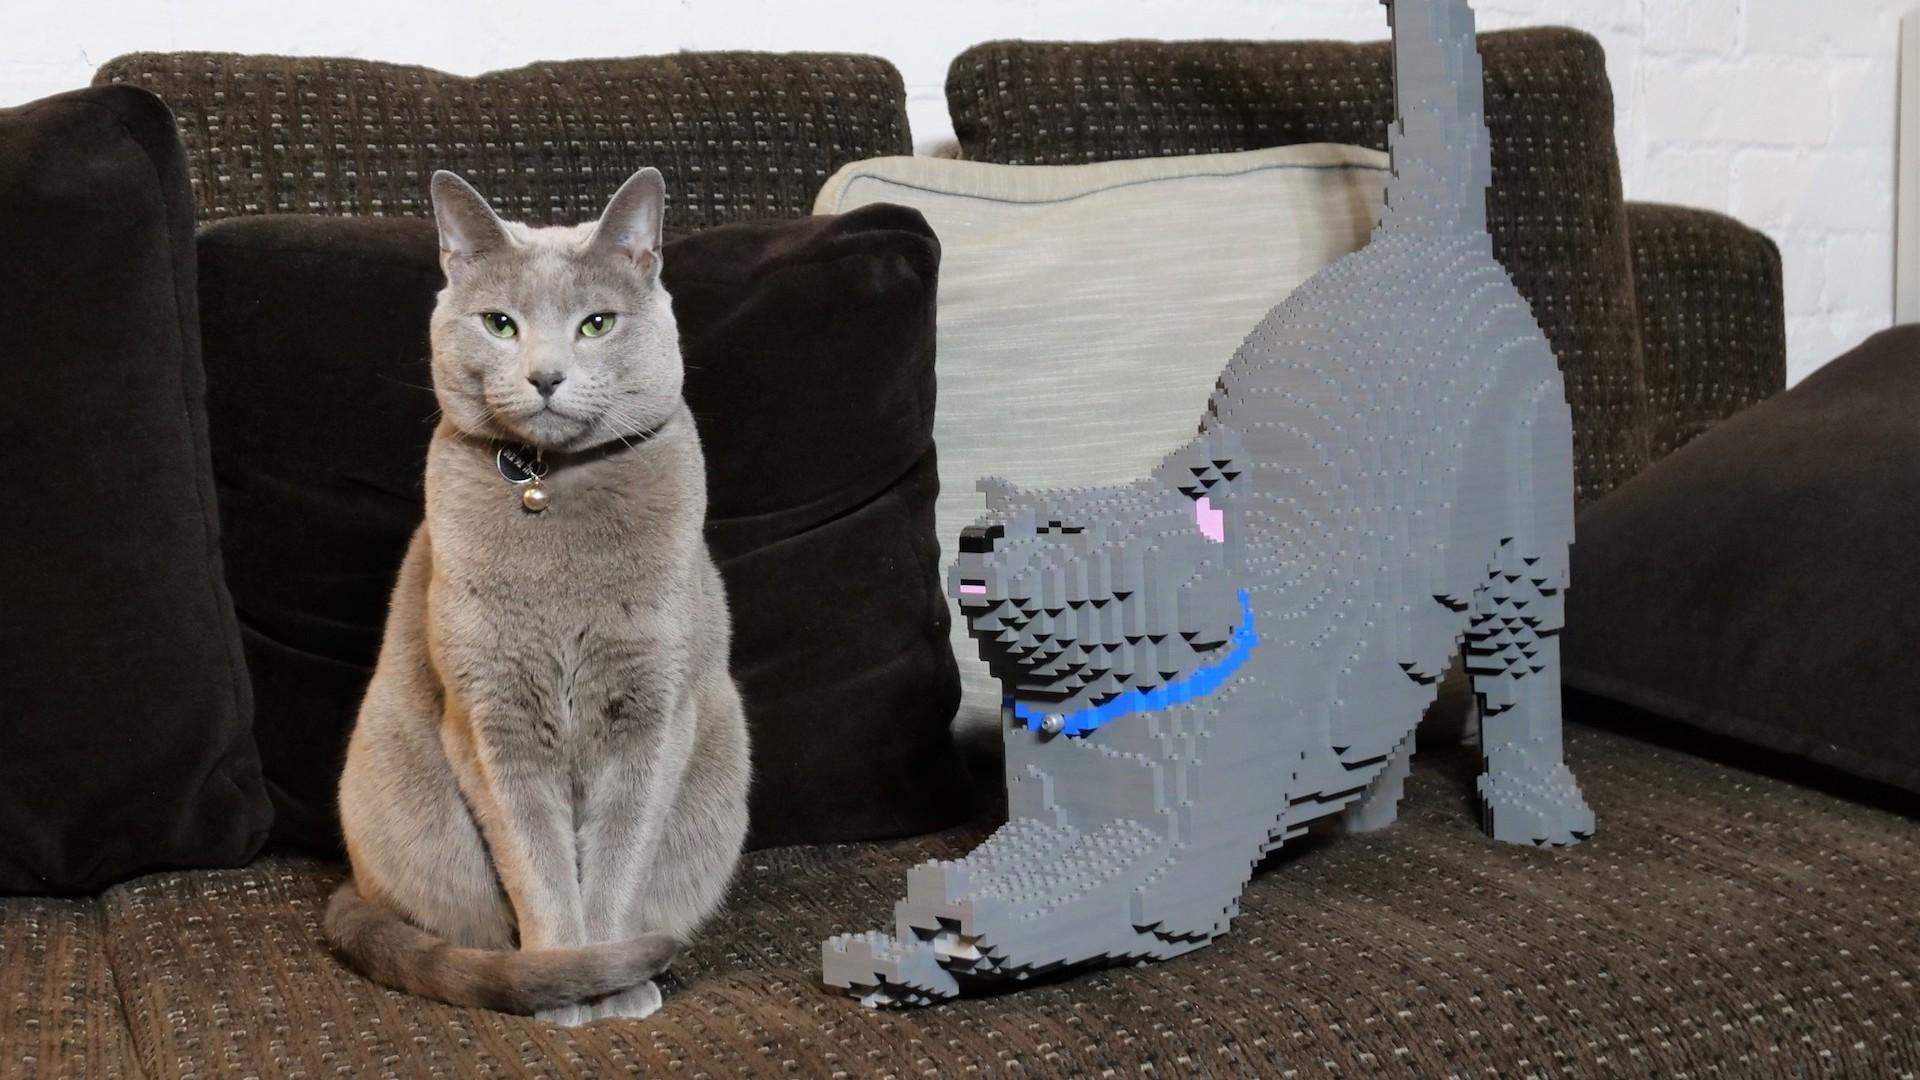 A Life-Size, Custom-Made Lego Version of Your Cat Is a Thing You Could Own